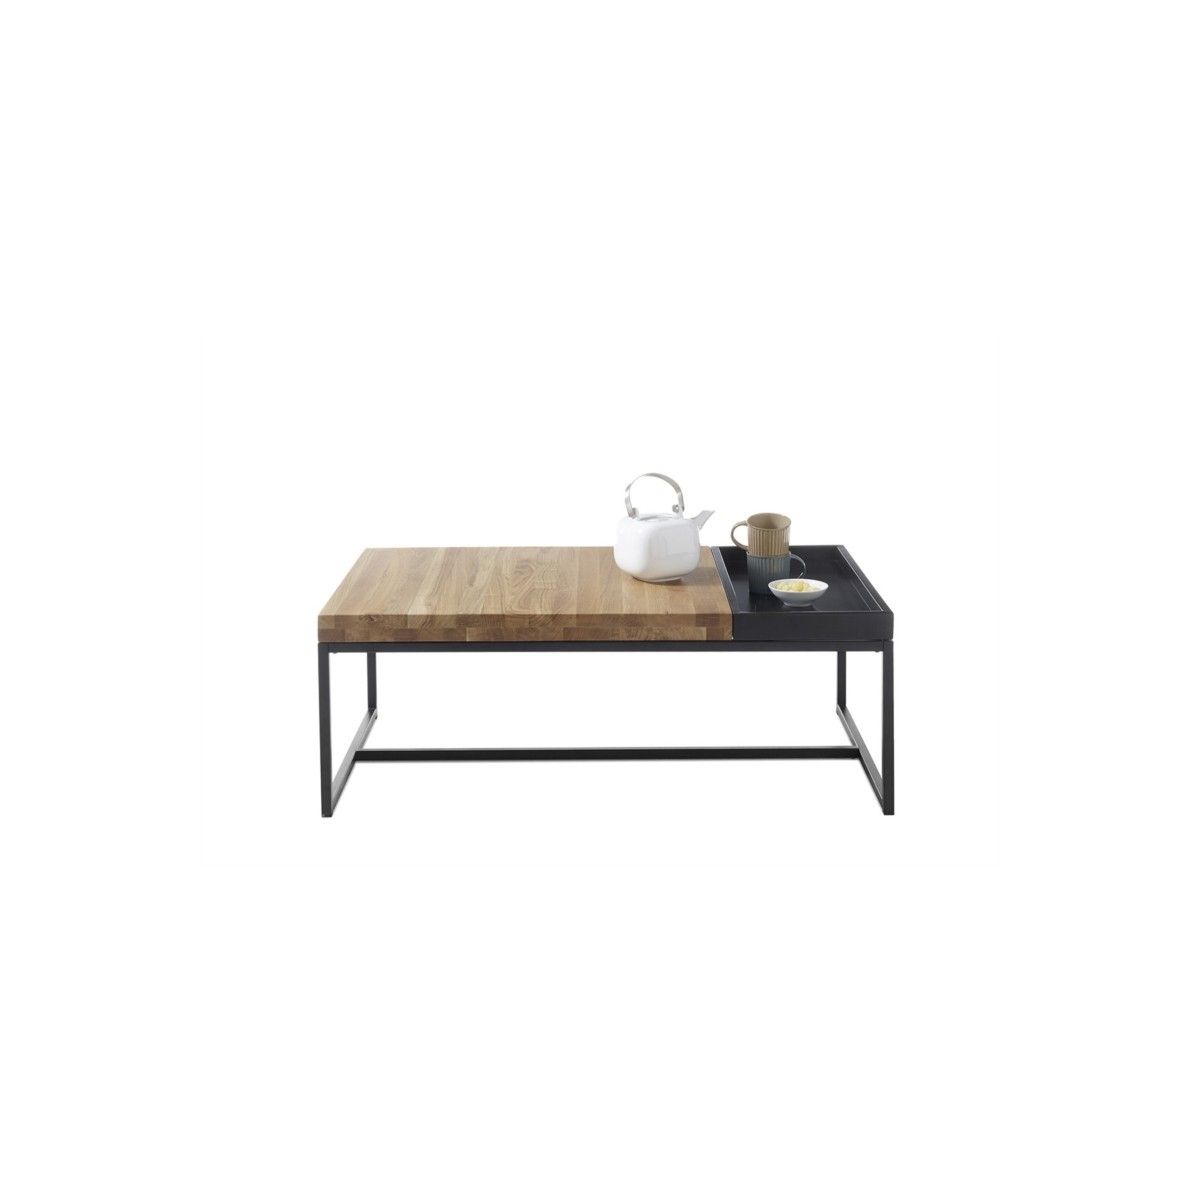 Solid Oak Coffee Table With Black Legs And Removable Top Indira (natural) –  Amp Story 8914 Inside Coffee Tables With Solid Legs (View 6 of 15)